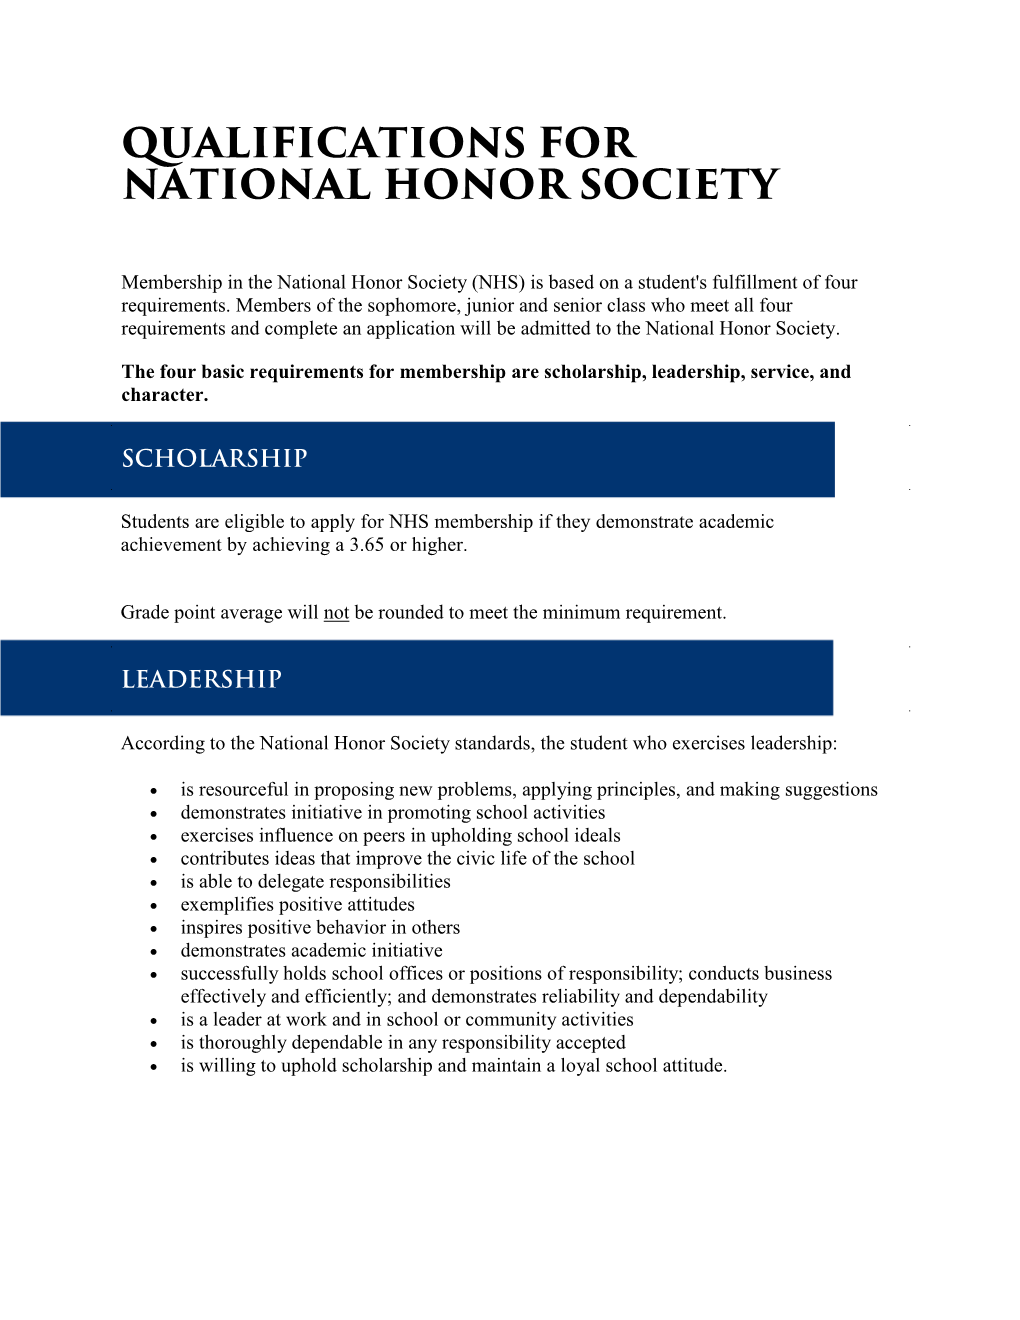 Qualifications for National Honor Society